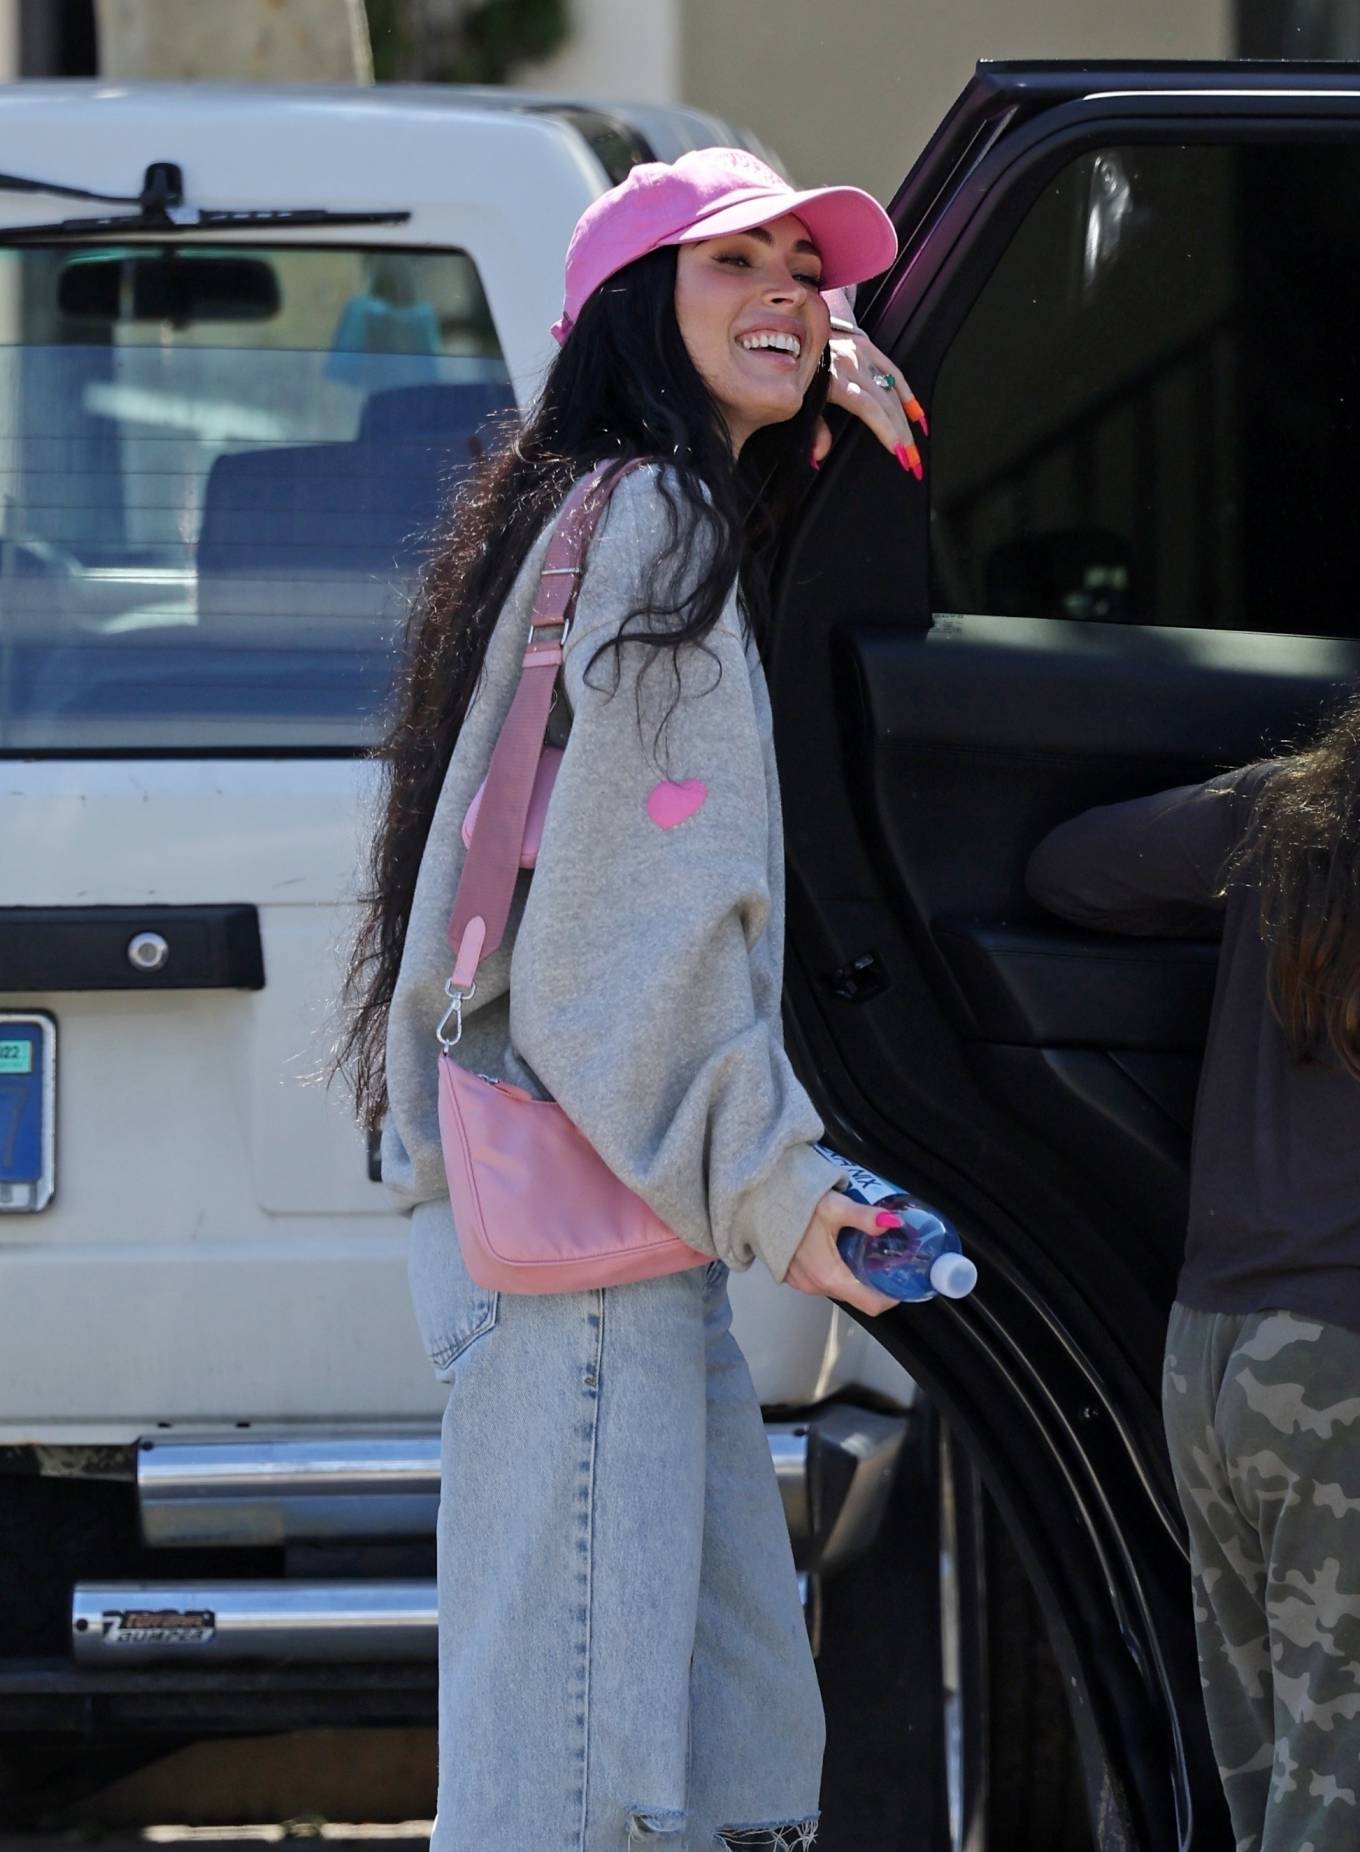 Megan Fox - All smiles while out in Malibu